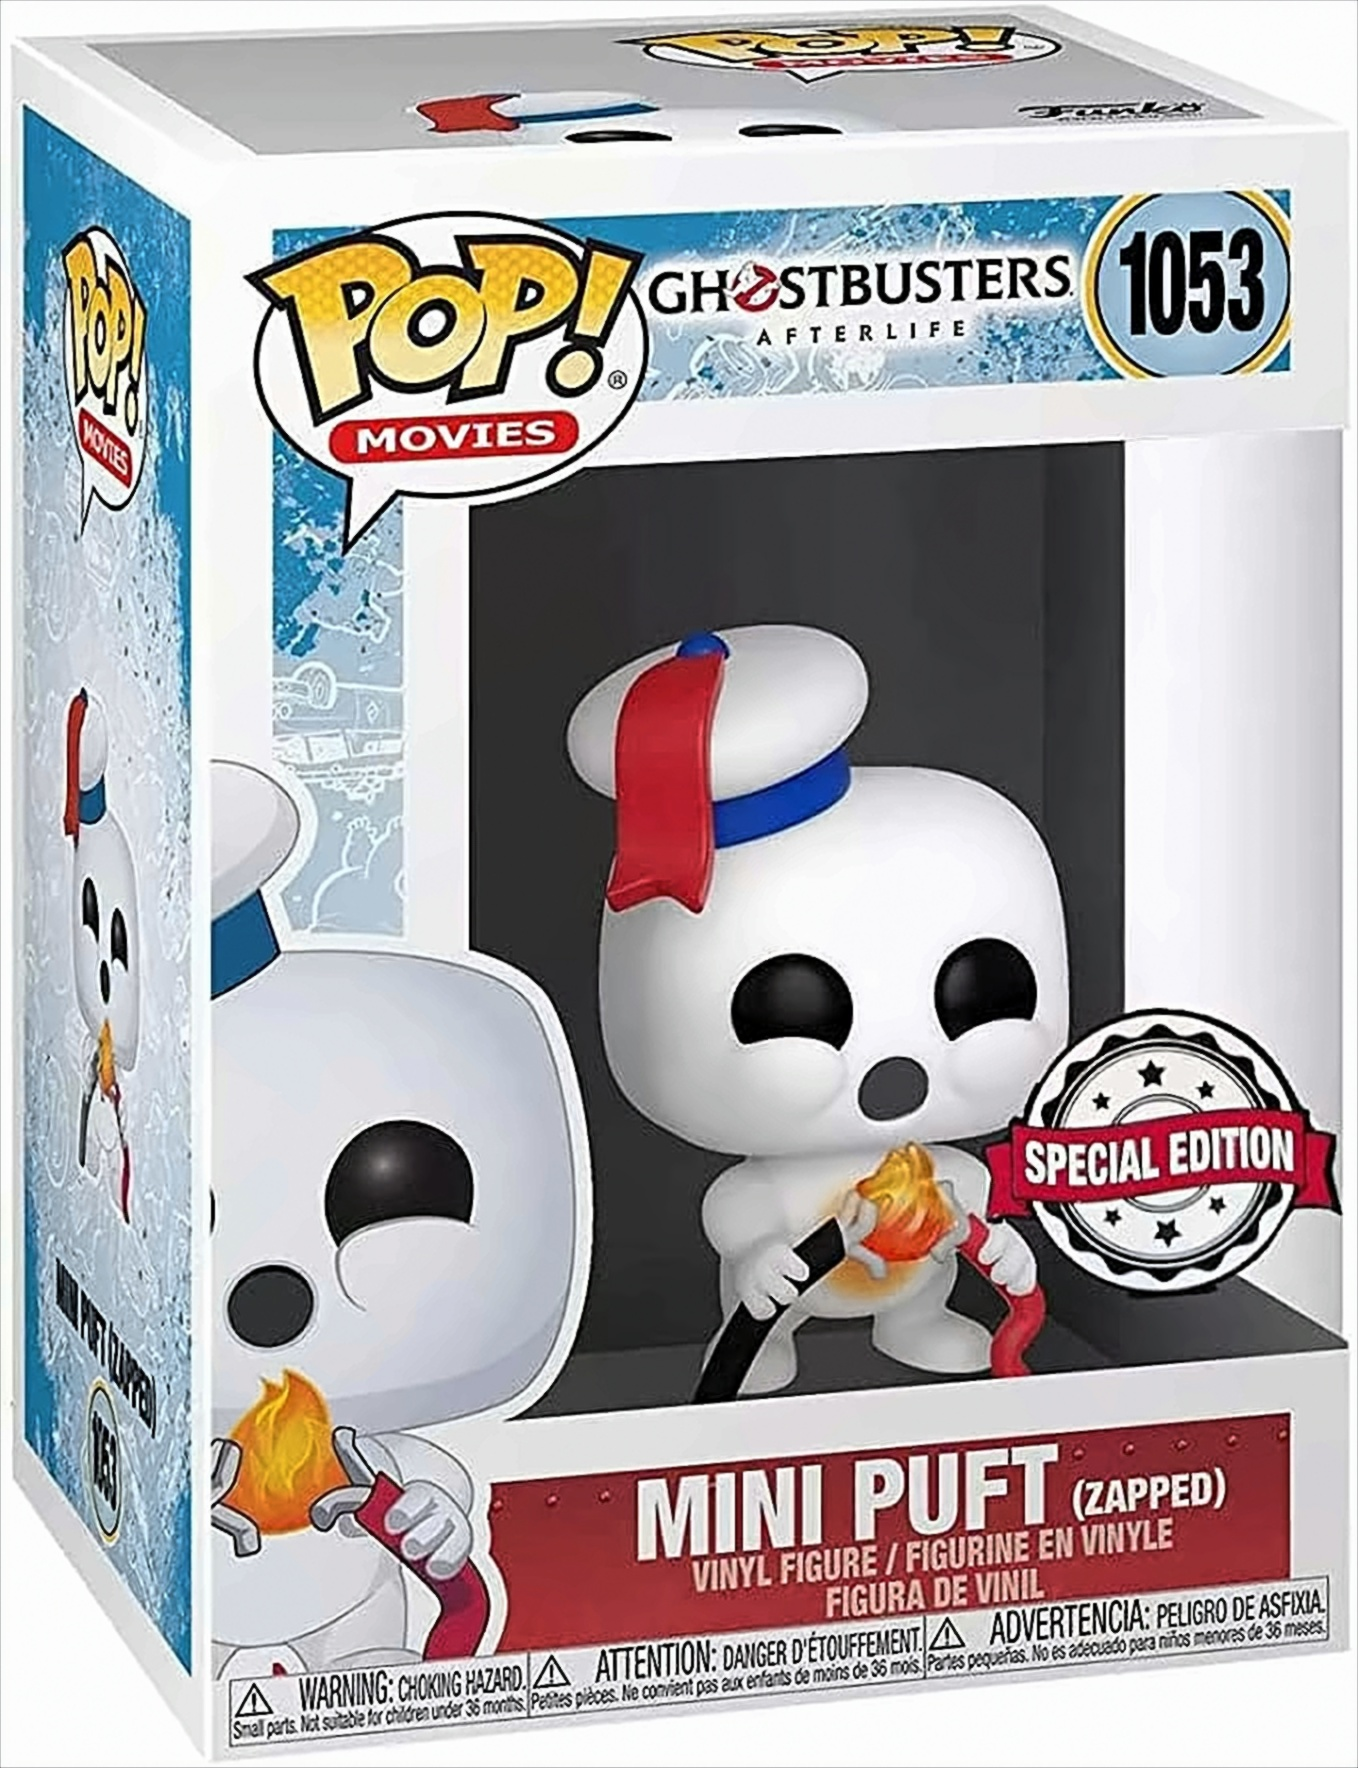 POP - Ghostbusters Afterlife Puft Mini - (Zapped)